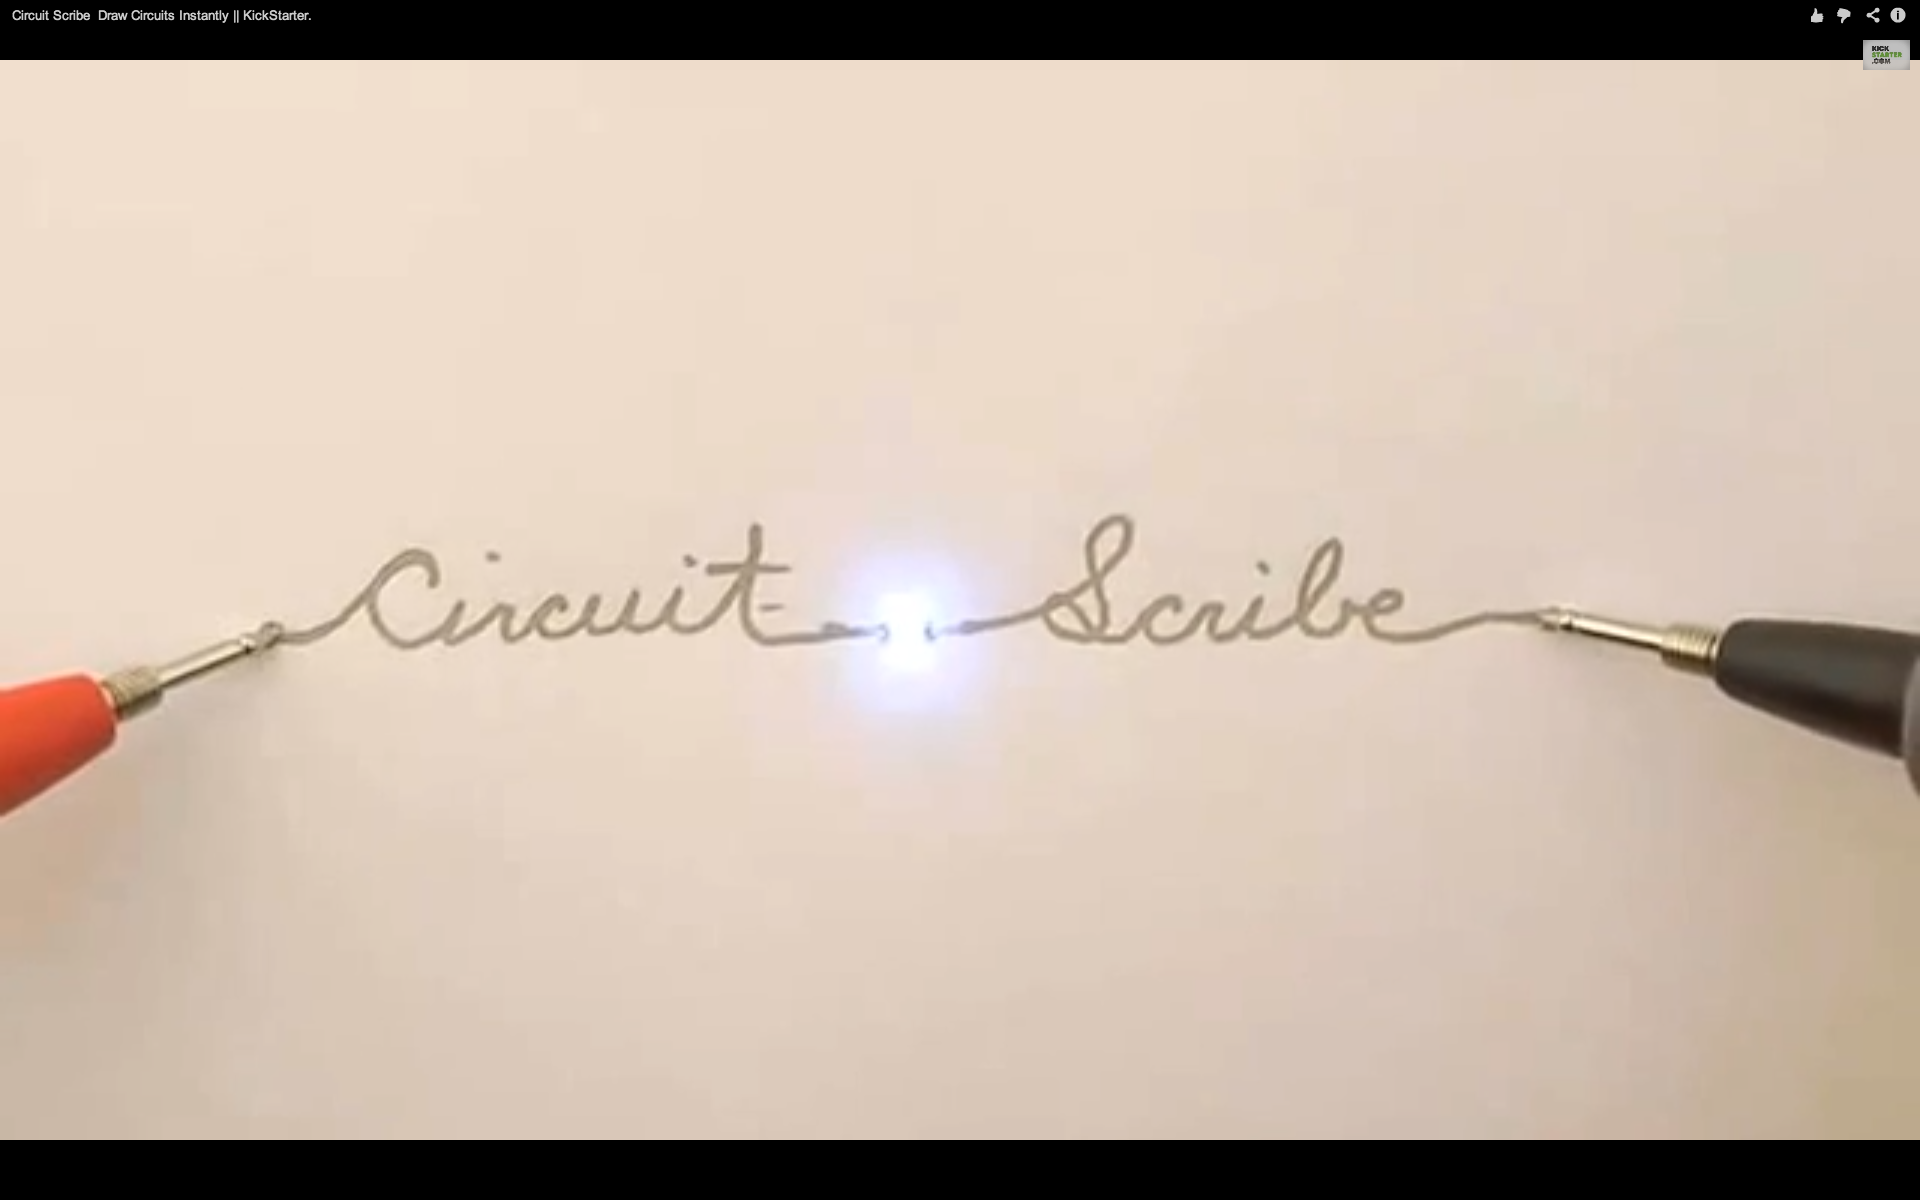 Building Electronic Circuits by Doodling [Video]